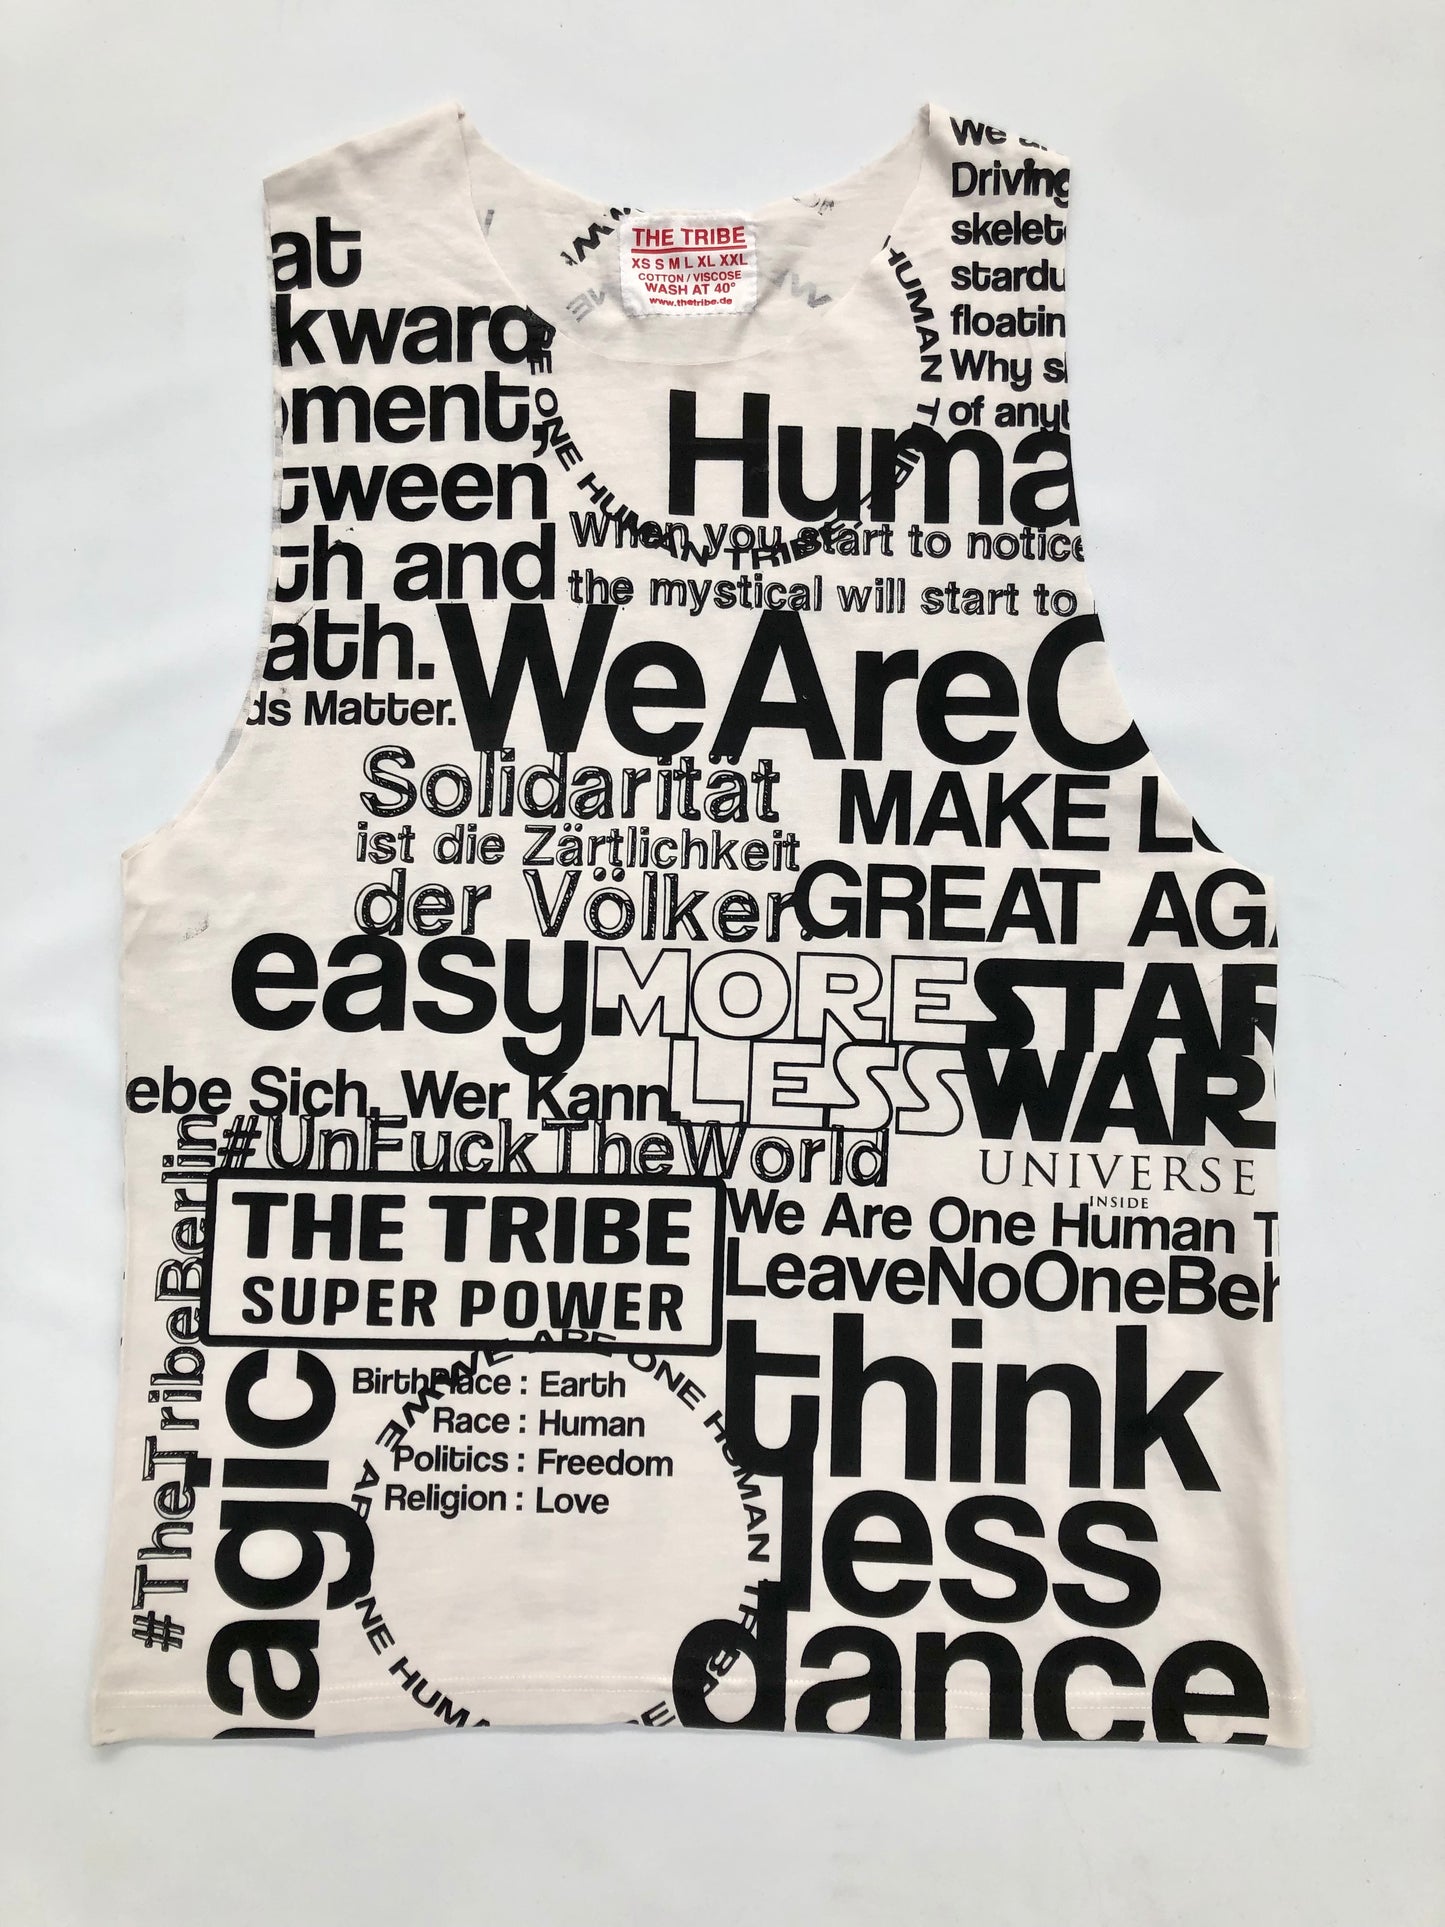 All In One Tank Shirt